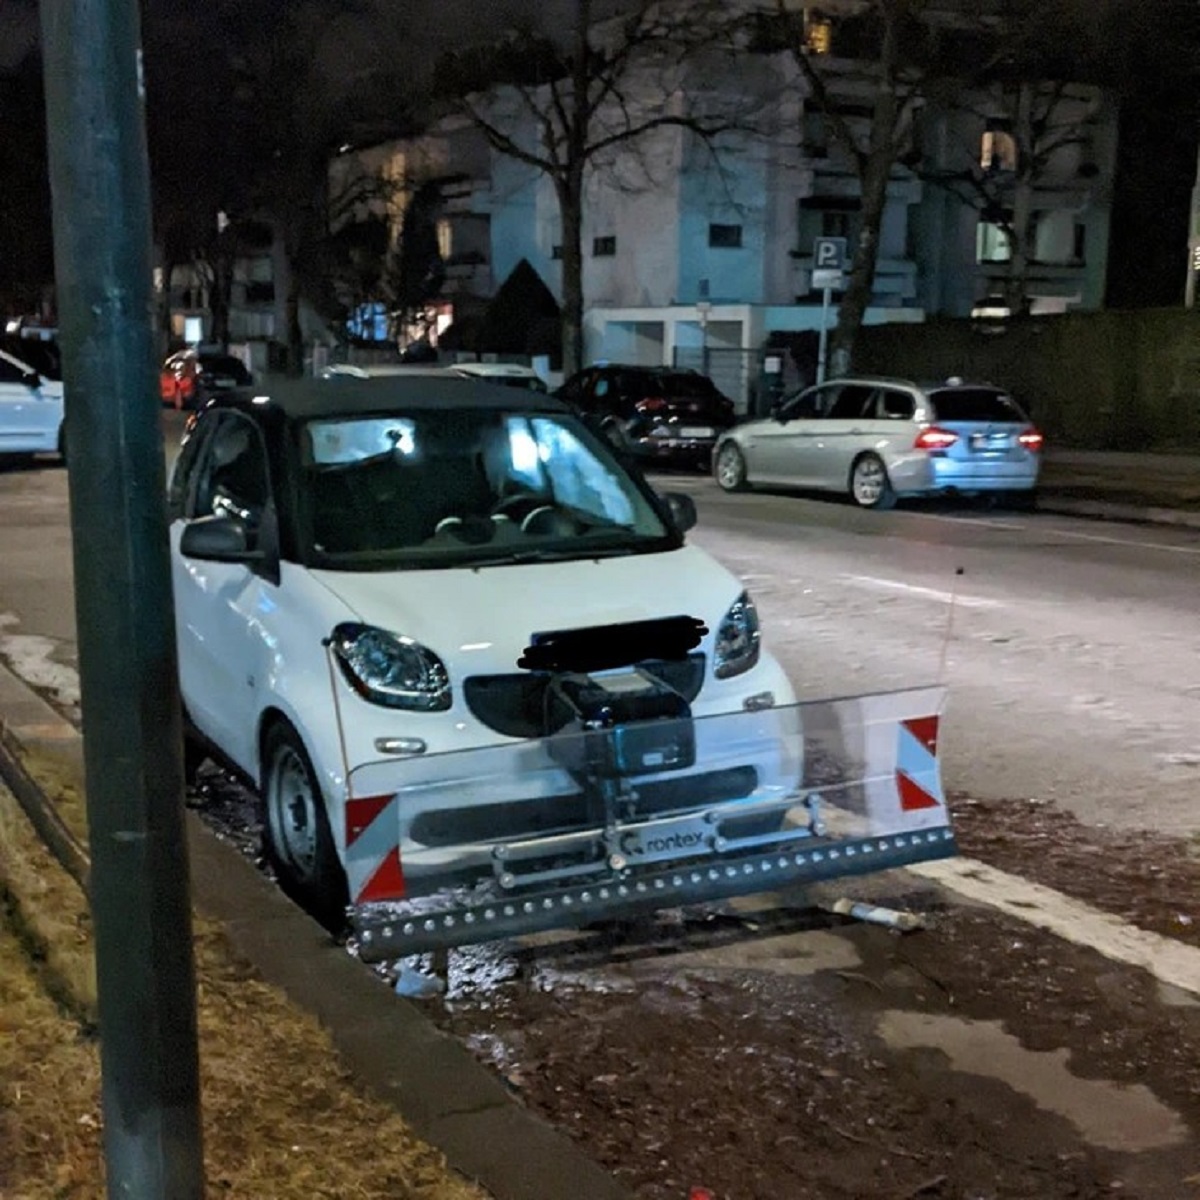 A smart car with a snowplow